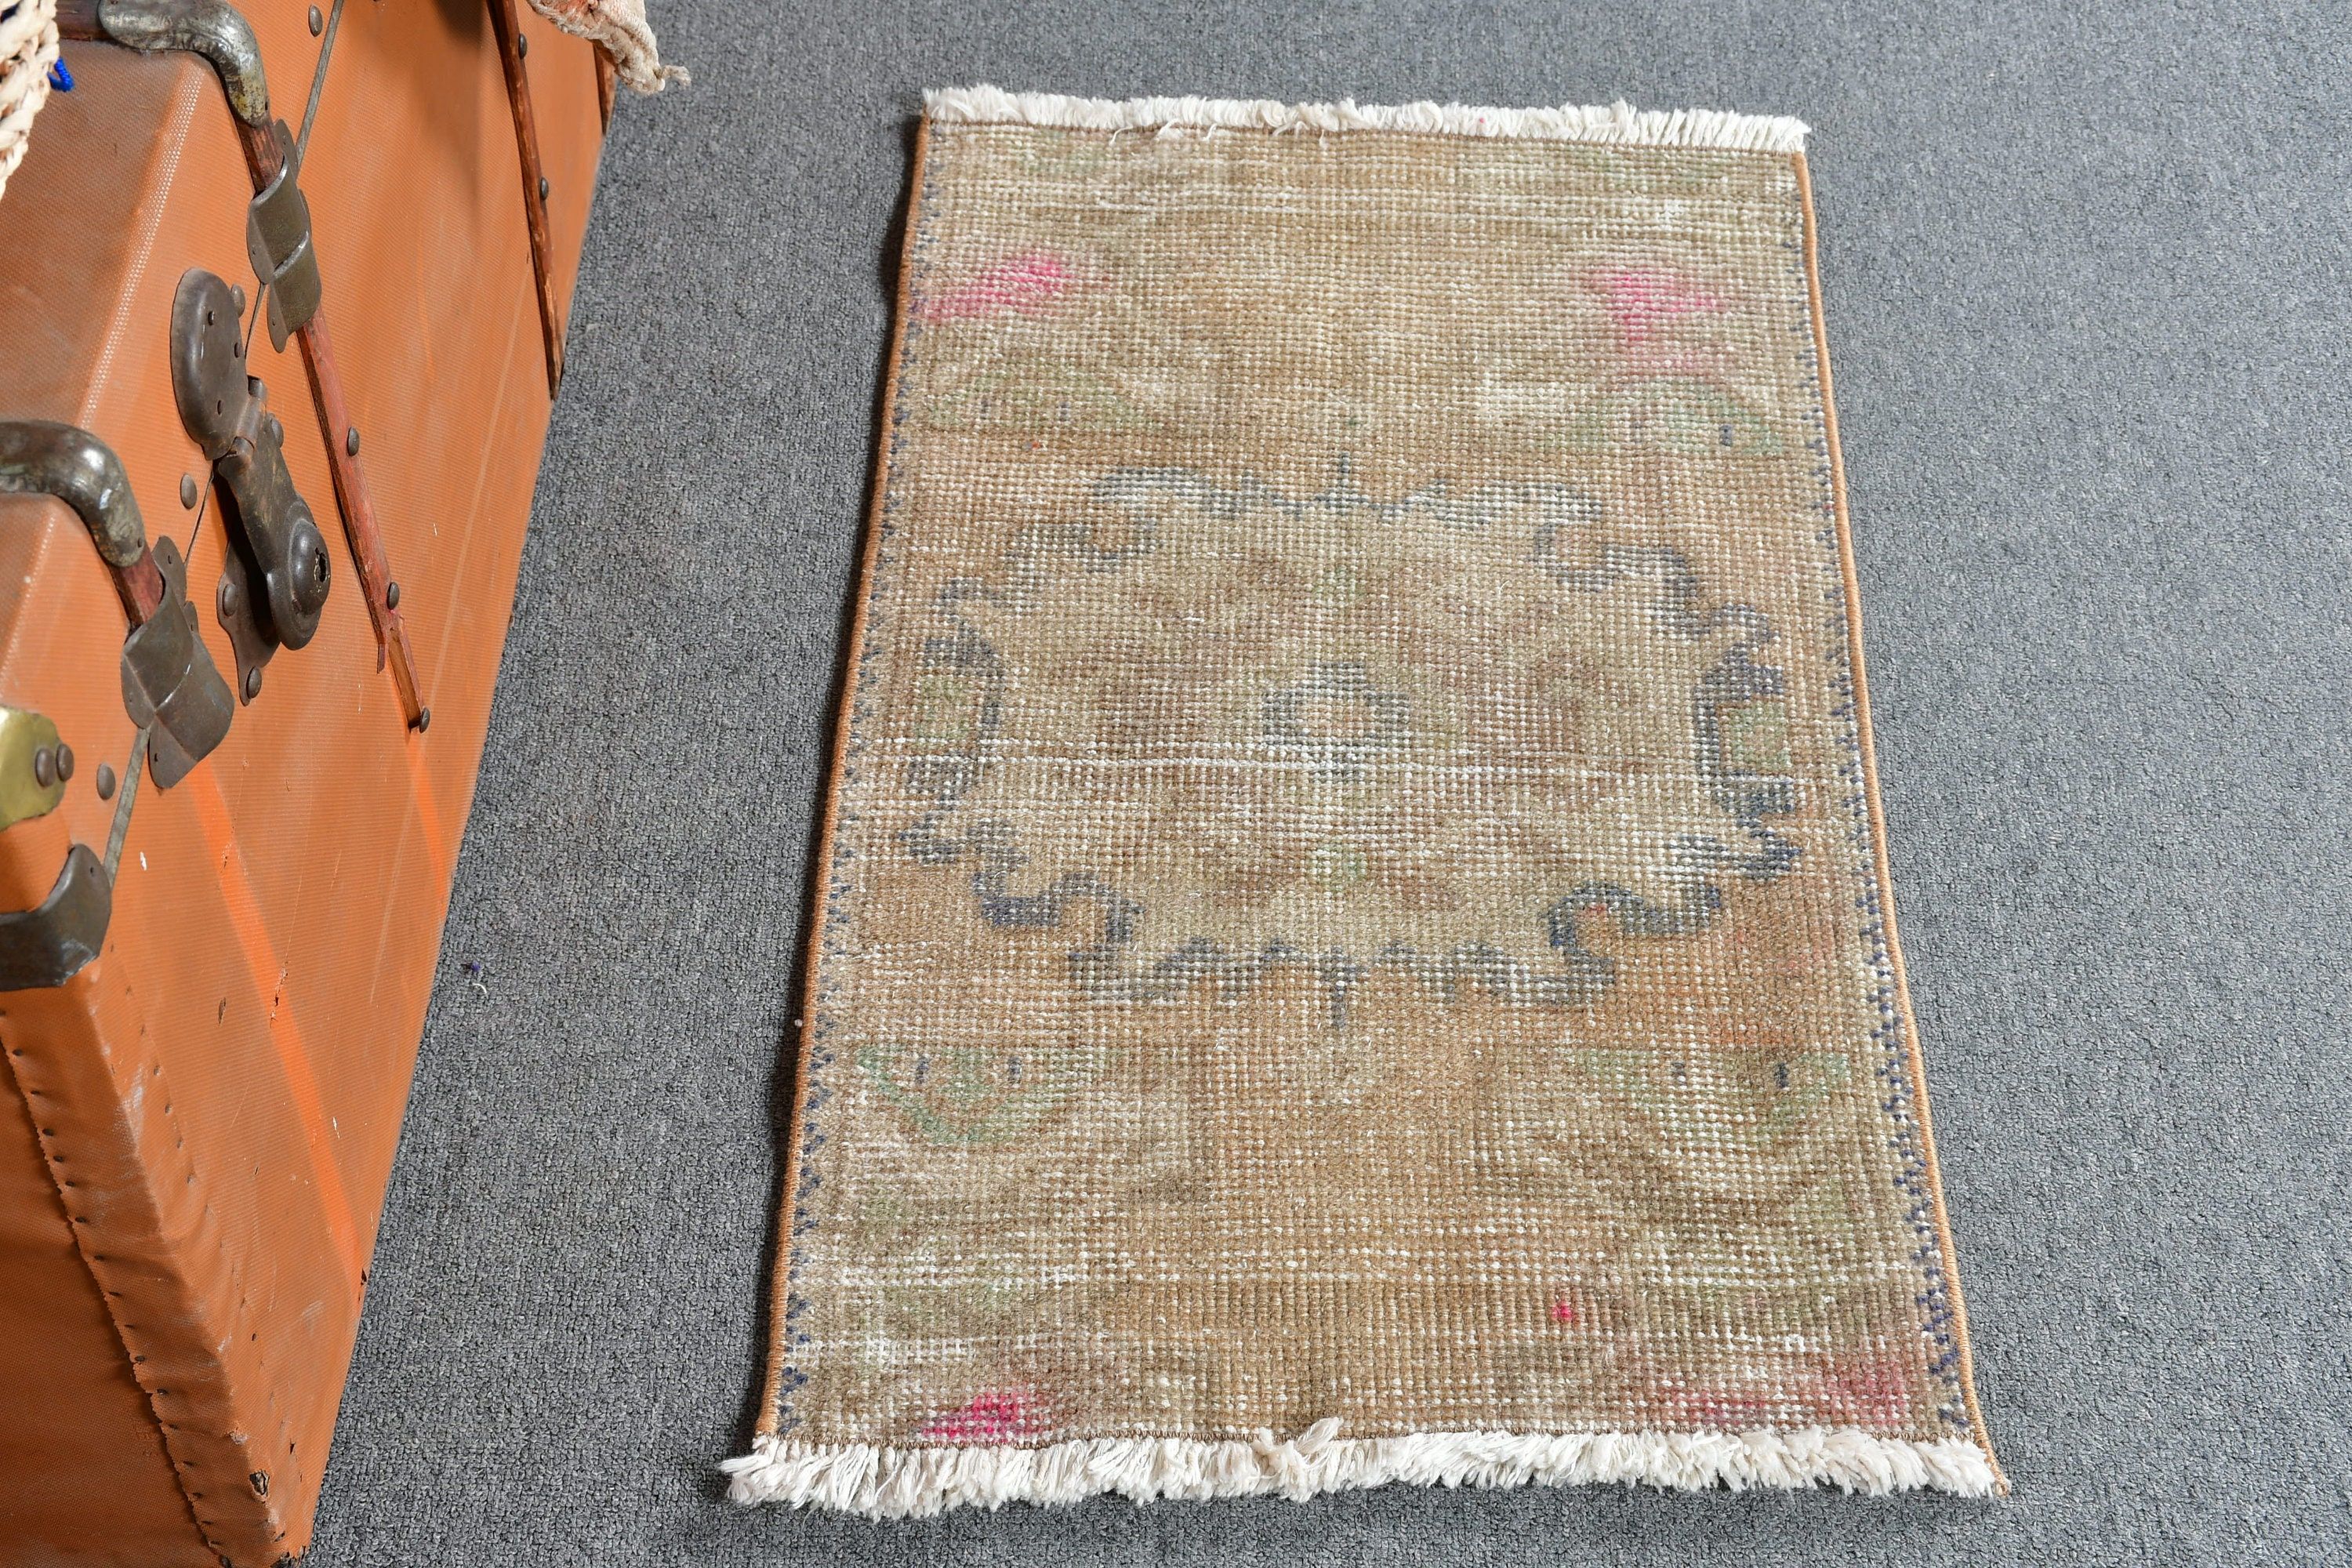 Vintage Rug, Bath Rugs, Turkish Rug, Rugs for Bedroom, Kitchen Rugs, Brown Oushak Rug, Home Decor Rugs, Oushak Rug, 1.6x2.6 ft Small Rug